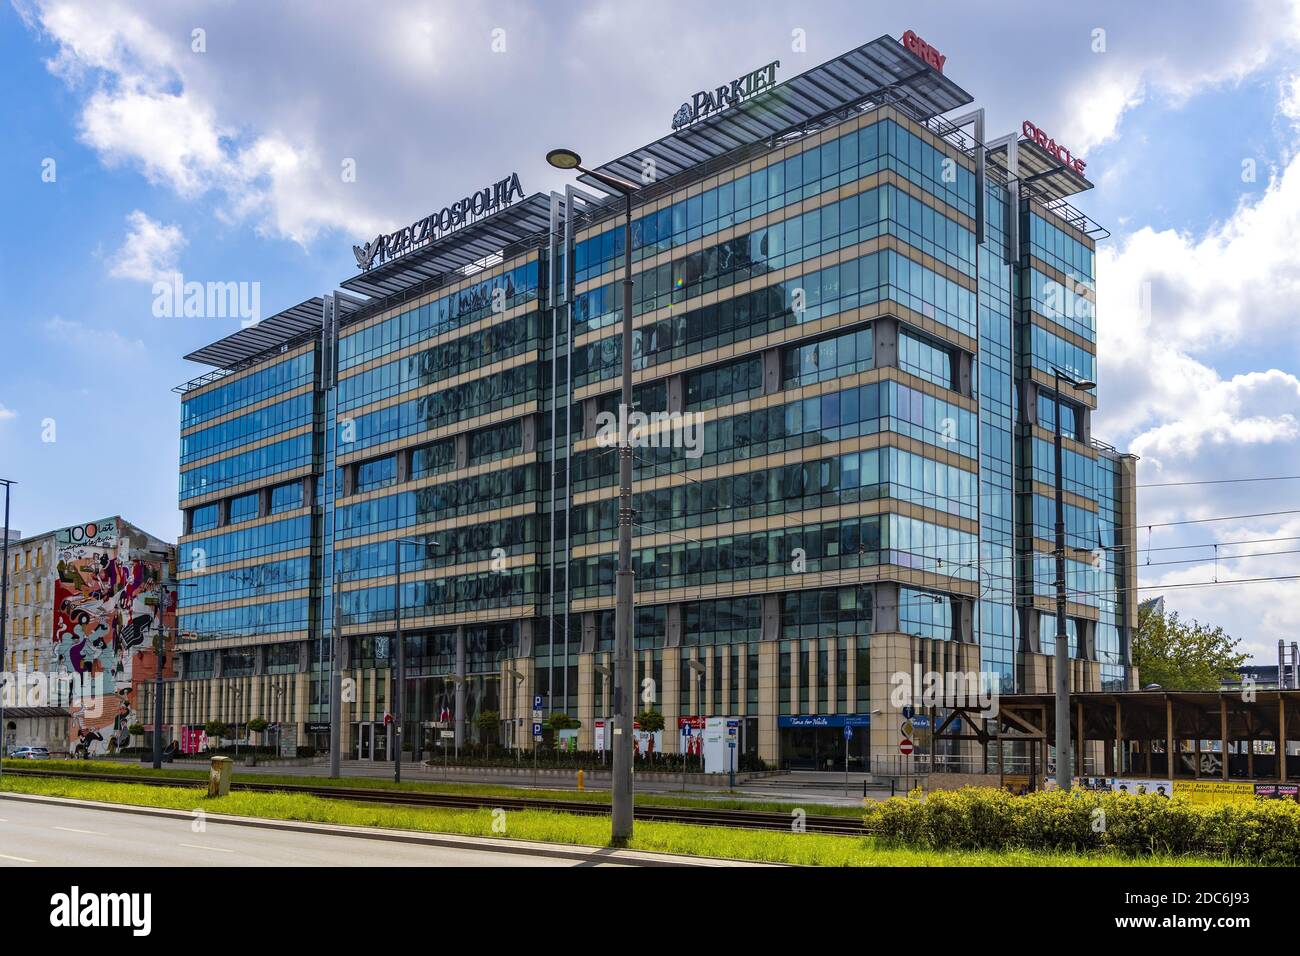 Warsaw, Mazovia / Poland - 2020/05/02: Prosta Office Center office building of Cromwell Property Group at Prosta 51 street in Wola business district o Stock Photo